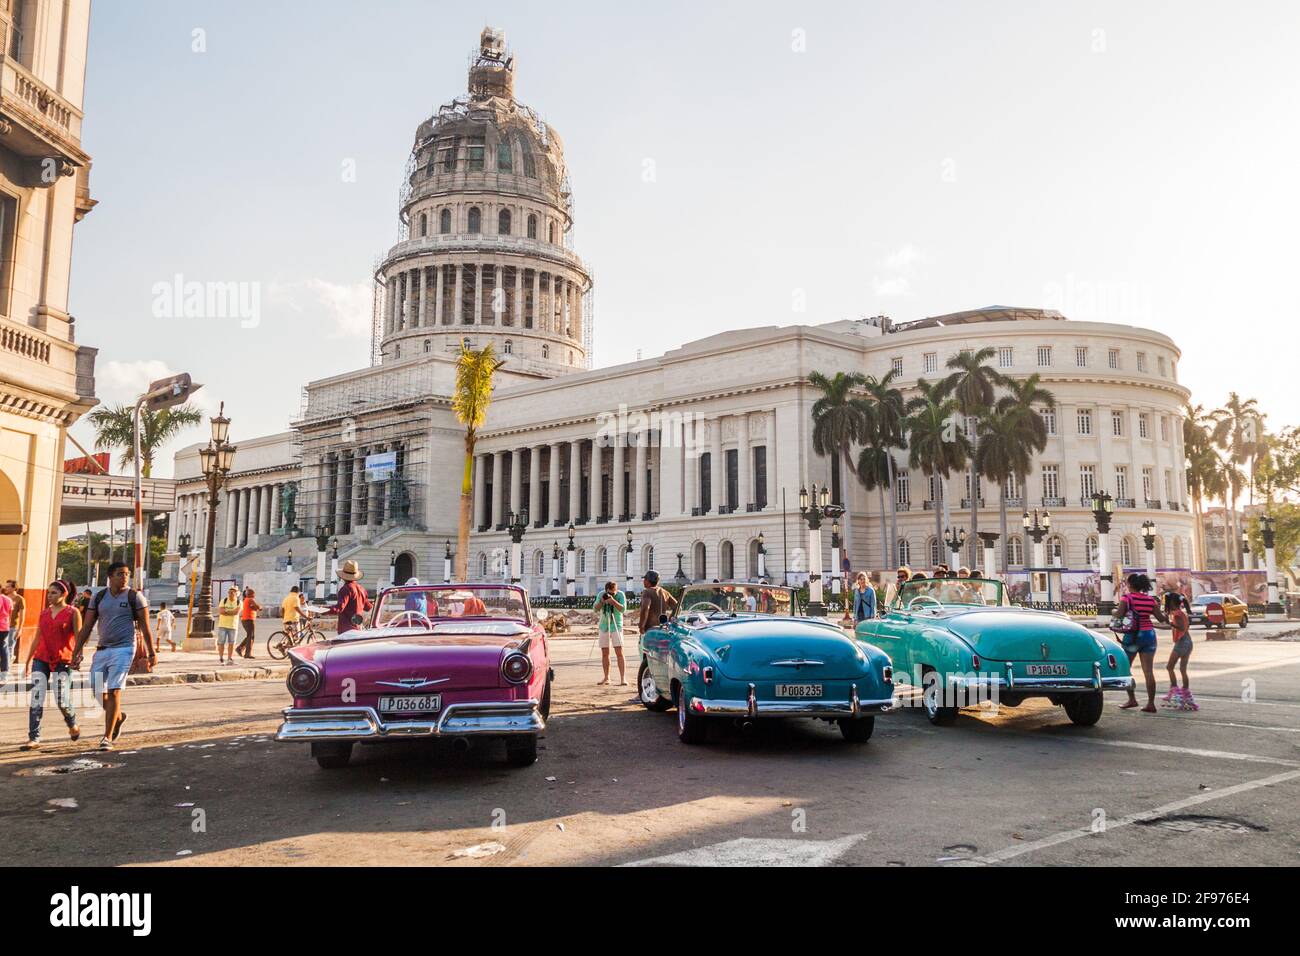 HAVANA, CUBA - FEB 20, 2016: Colorful vintage cars wait for tourists in Parque Central in Havana in front of the National Capitol. Stock Photo